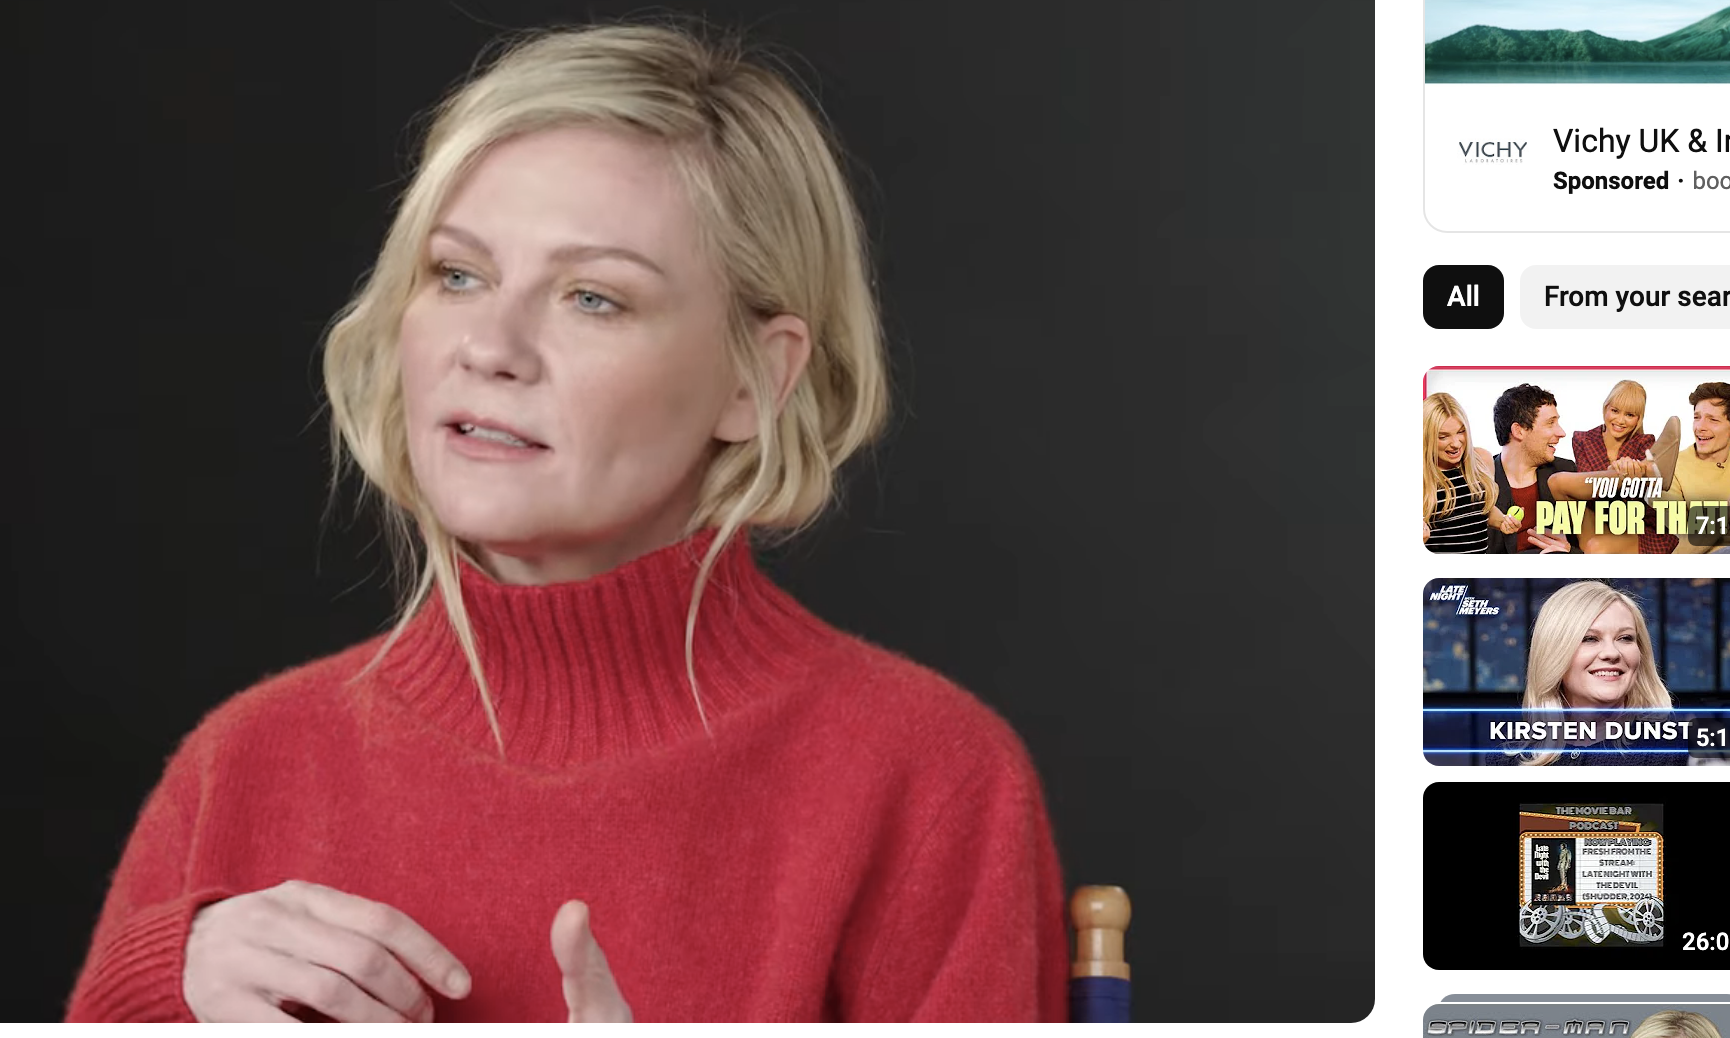 Kristen Dunst in a red turtleneck, discussing a role, in a Youtube video screenshot